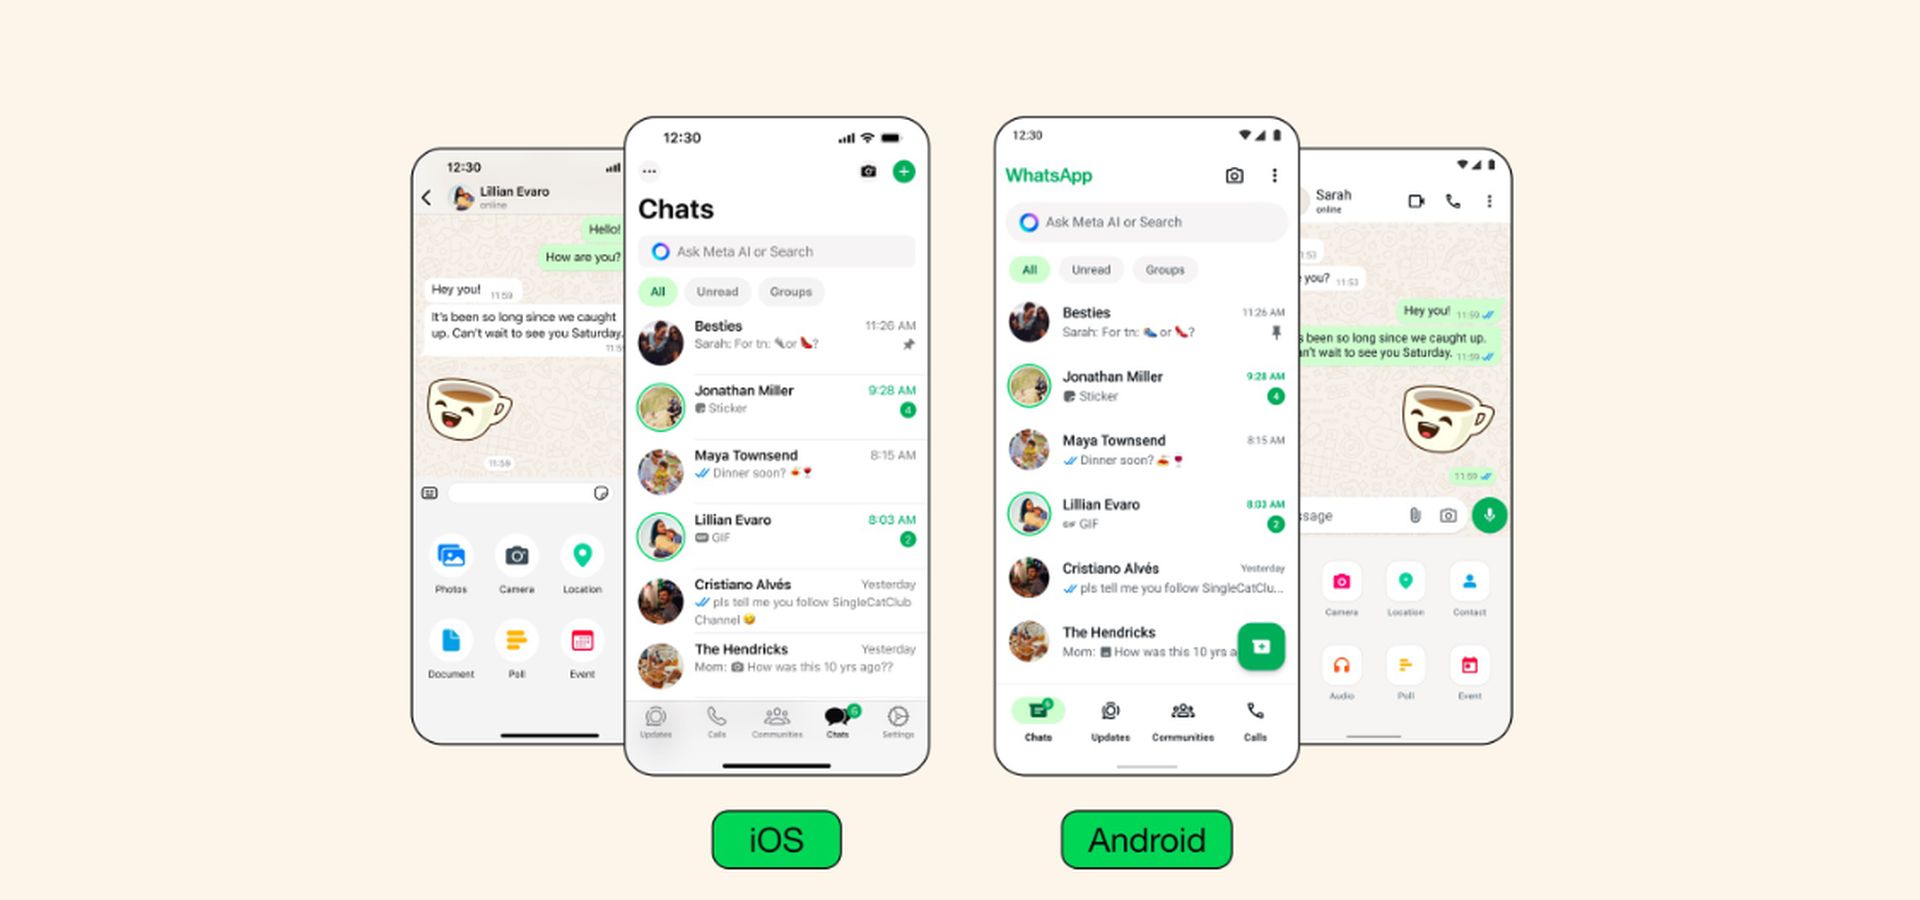 WhatsApp has changed its iOS and Android UI